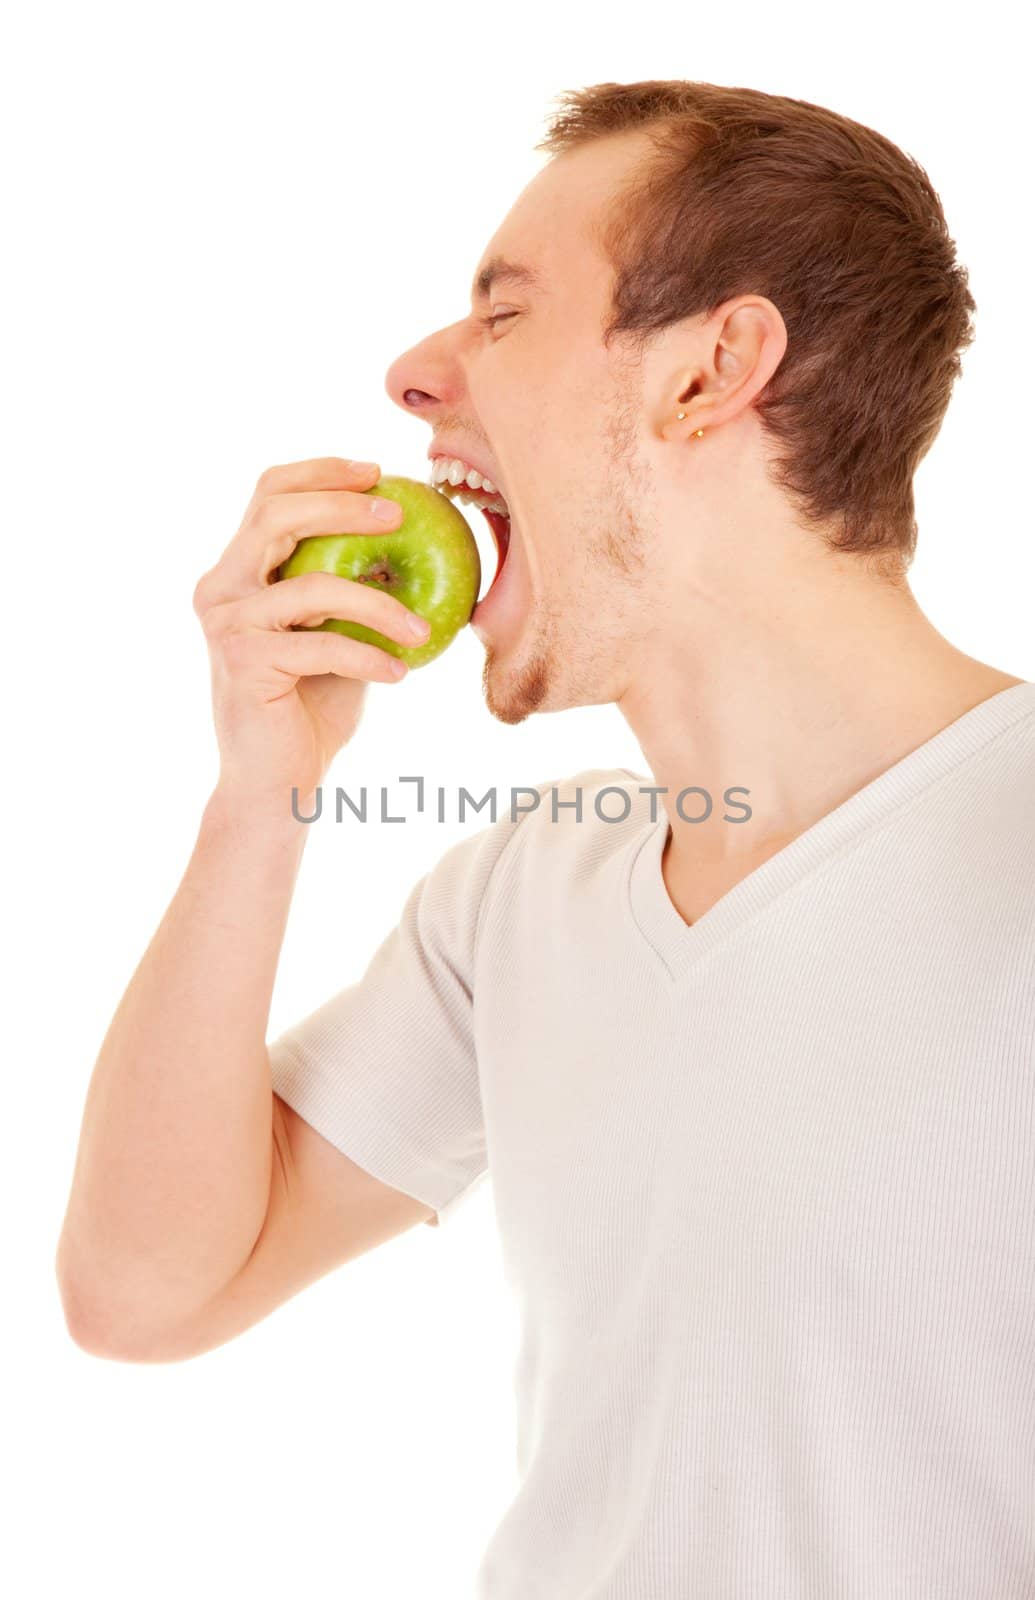 Young handsome man is biting a green apple on his palm. On white background.